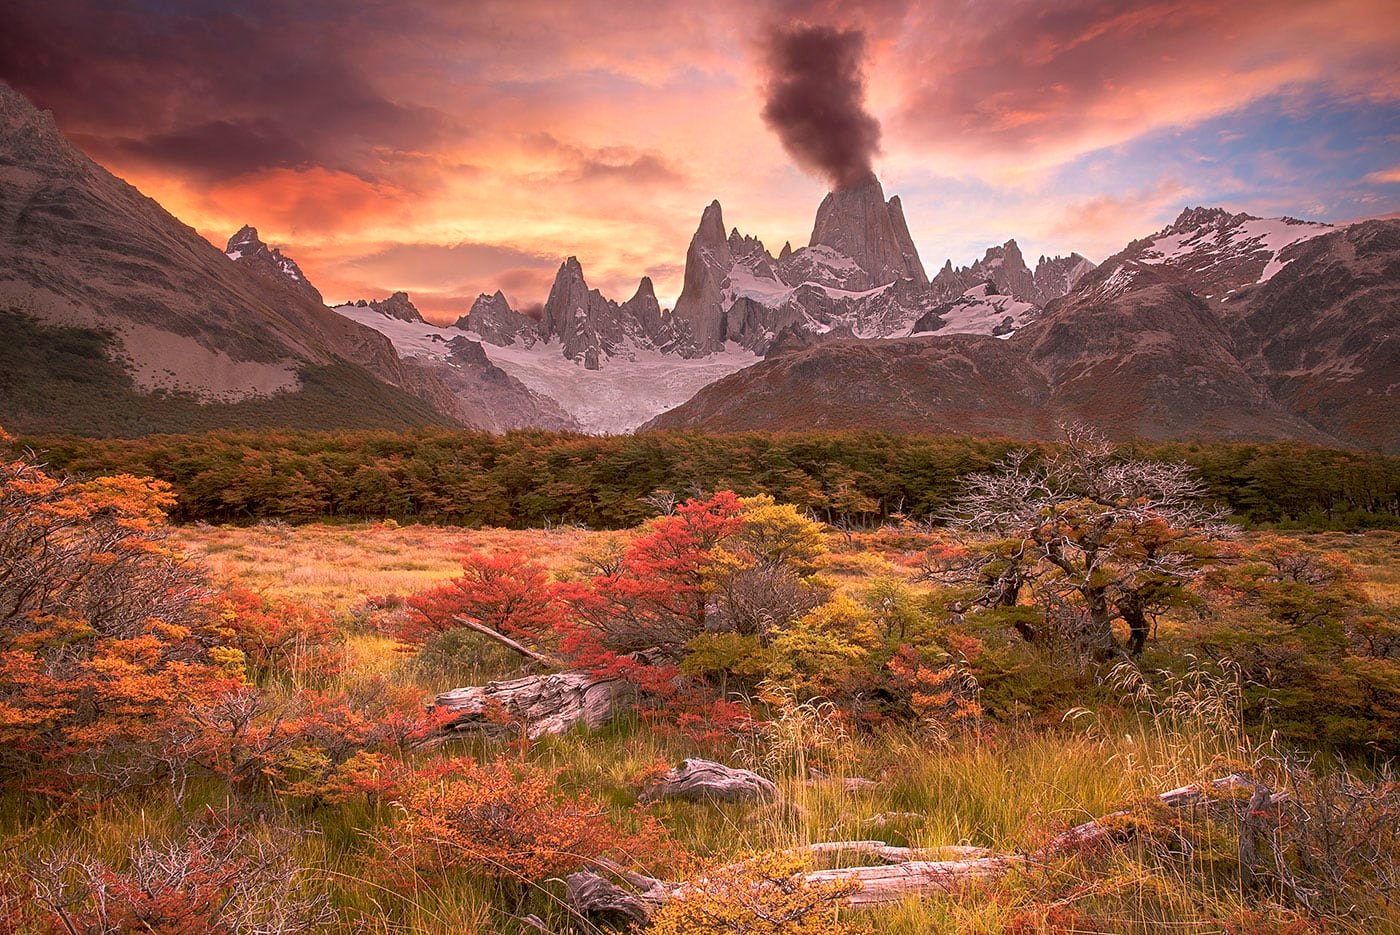 Autumn in Patagonia, a Unique Travel Photography Workshop